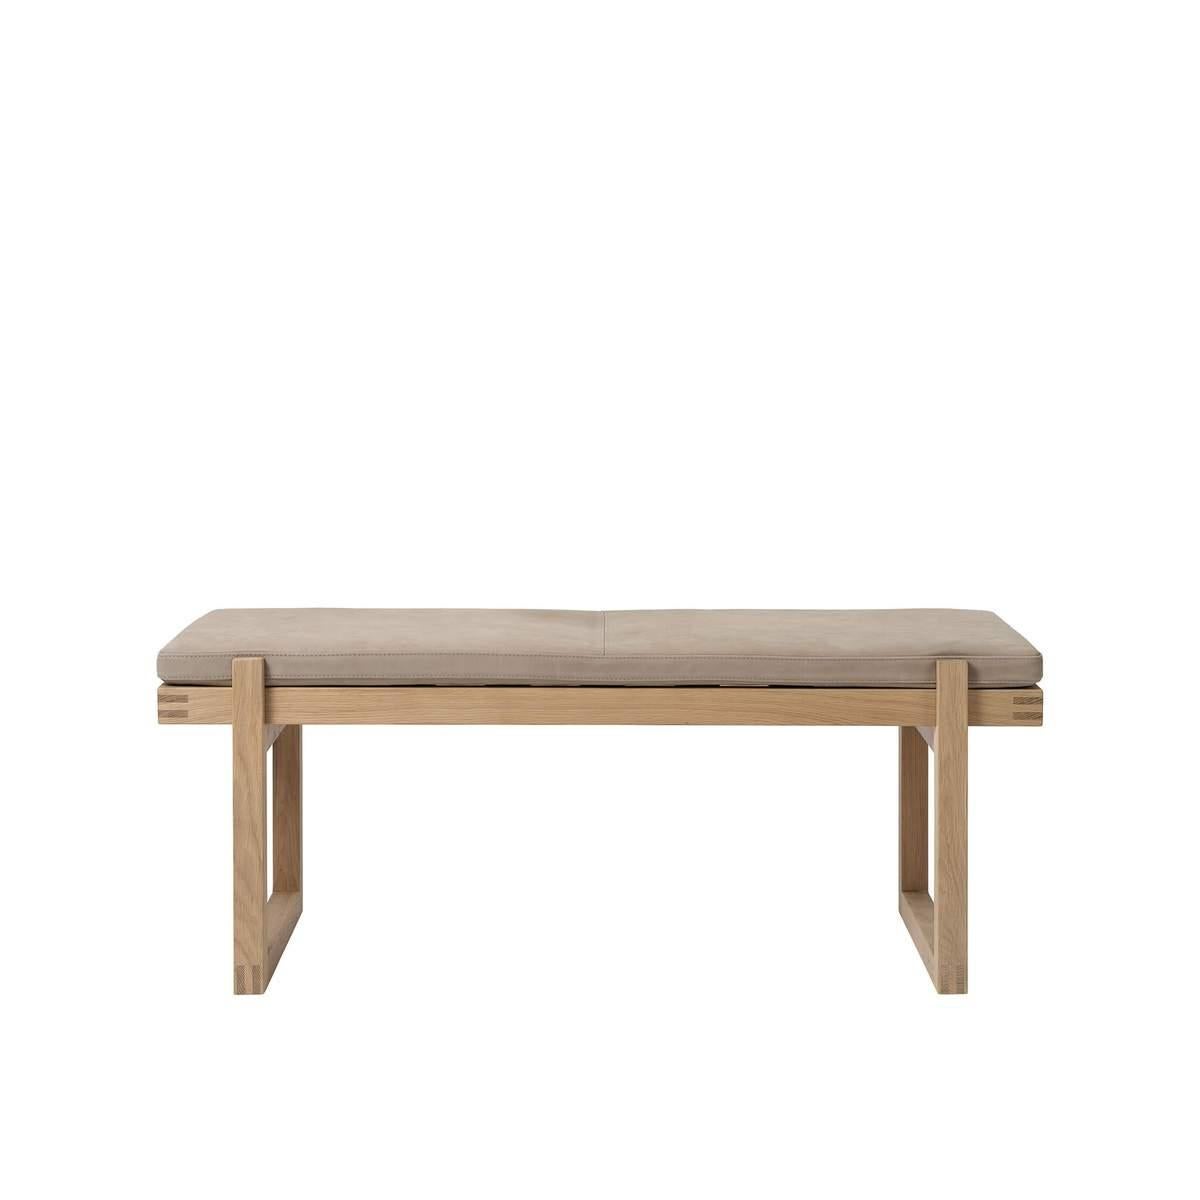 Light brown minimal bench by Kristina Dam Studio
Materials: Solid oak with oil treatment, light brown aniline nubuck. 
Also available in other colors.
Dimensions: 40 x 115 x H 44cm.

The bench frame is made of solid oak and the soft foam